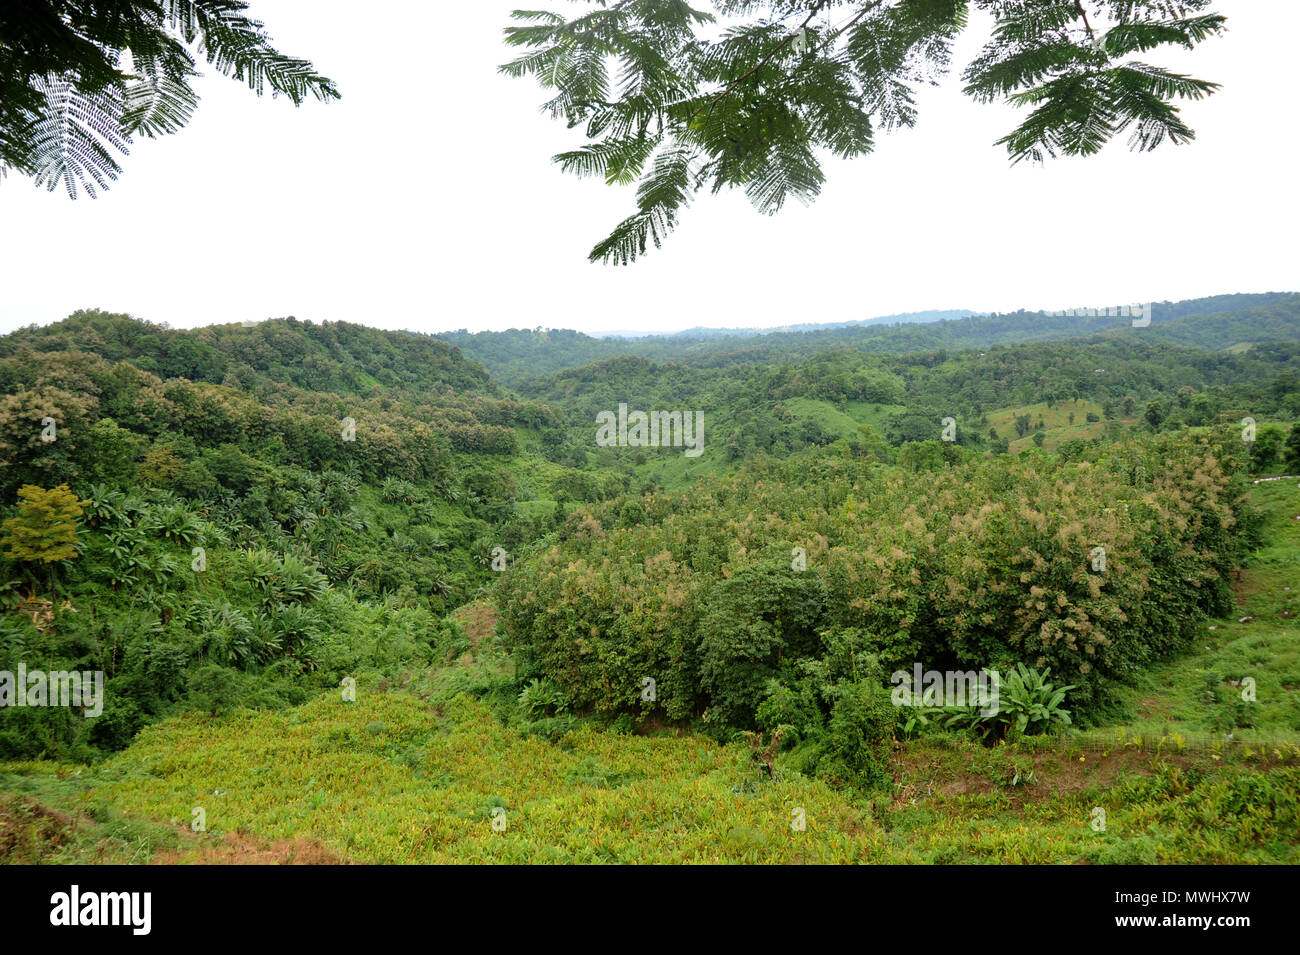 Khagrachari, Bangladesh - October 17, 2011: The Landscape view of Khagrachari is regarded as one of the most attractive travel destinations in Banglad Stock Photo